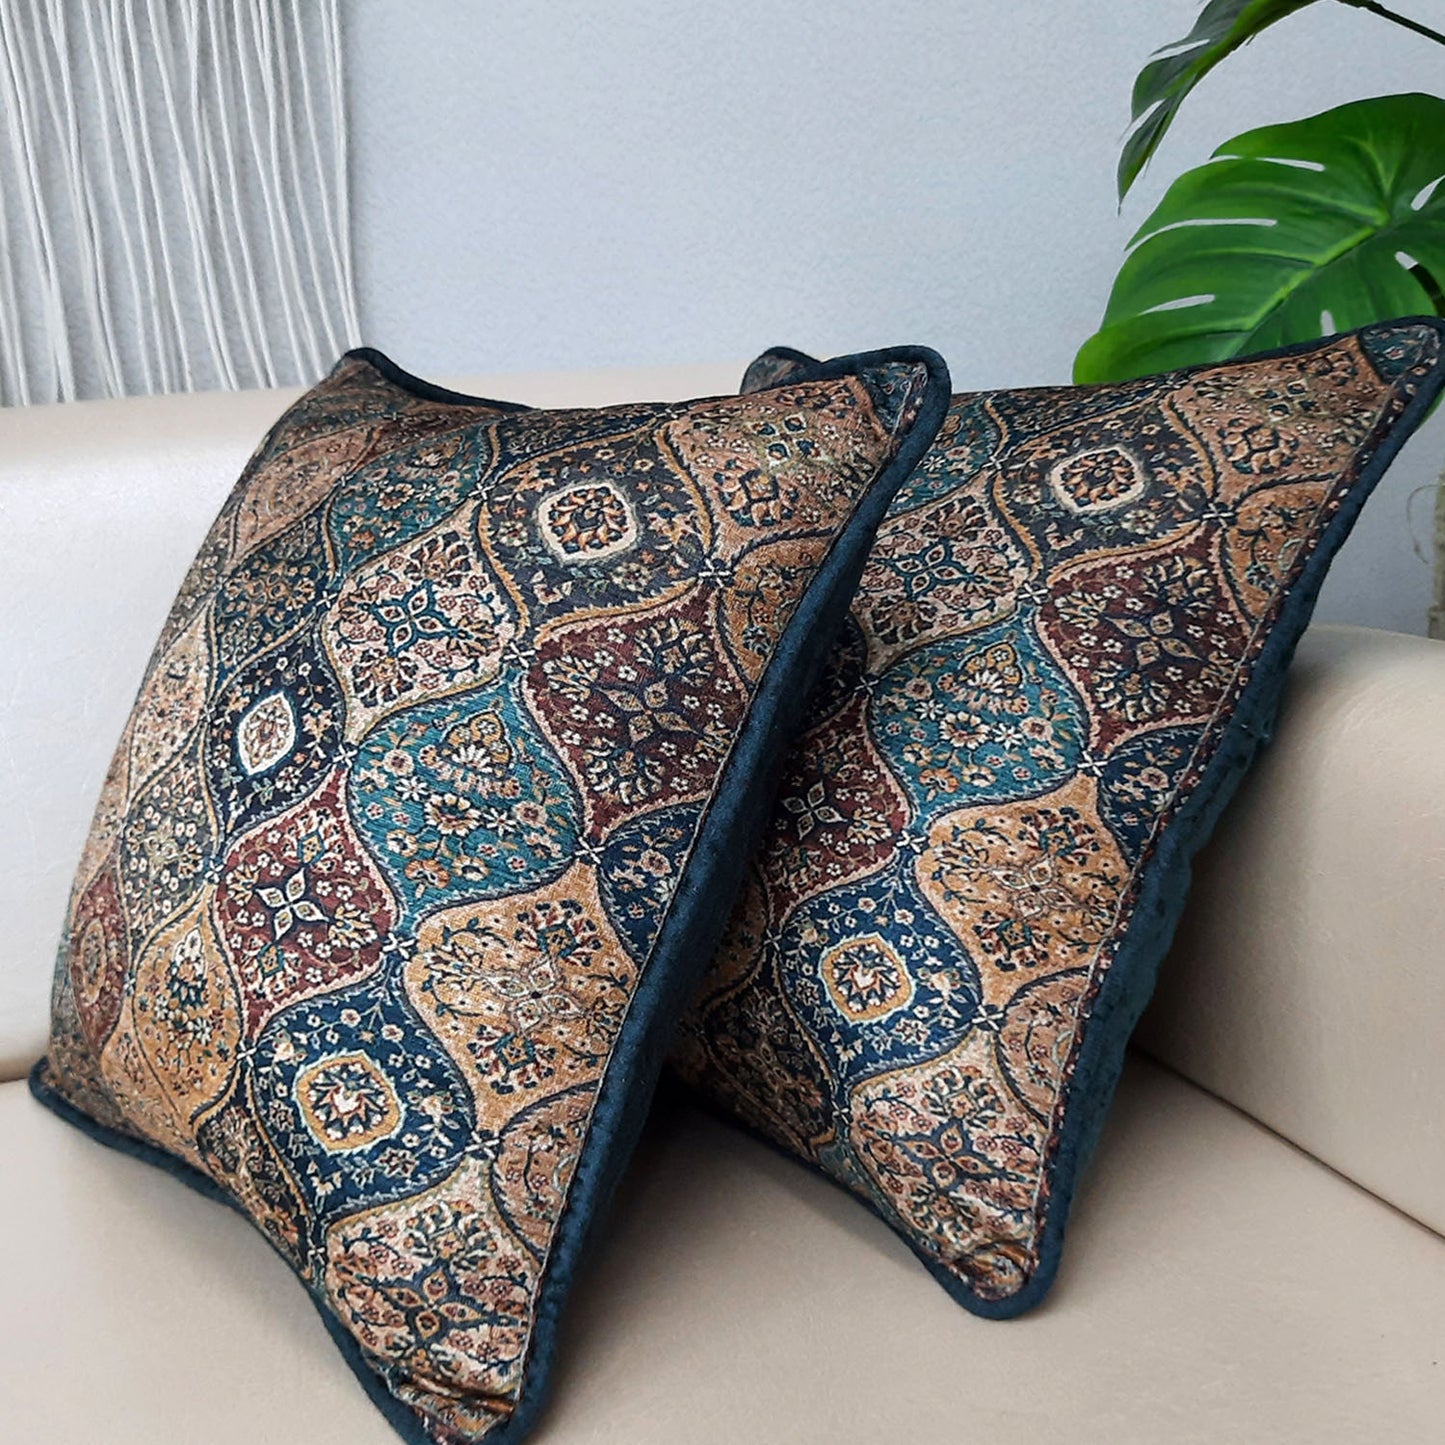 Cushion Cover with Filler – Beautiful Persian Design – Best Price 40cm x 40cm (~16″ x 16″) – Set of 2